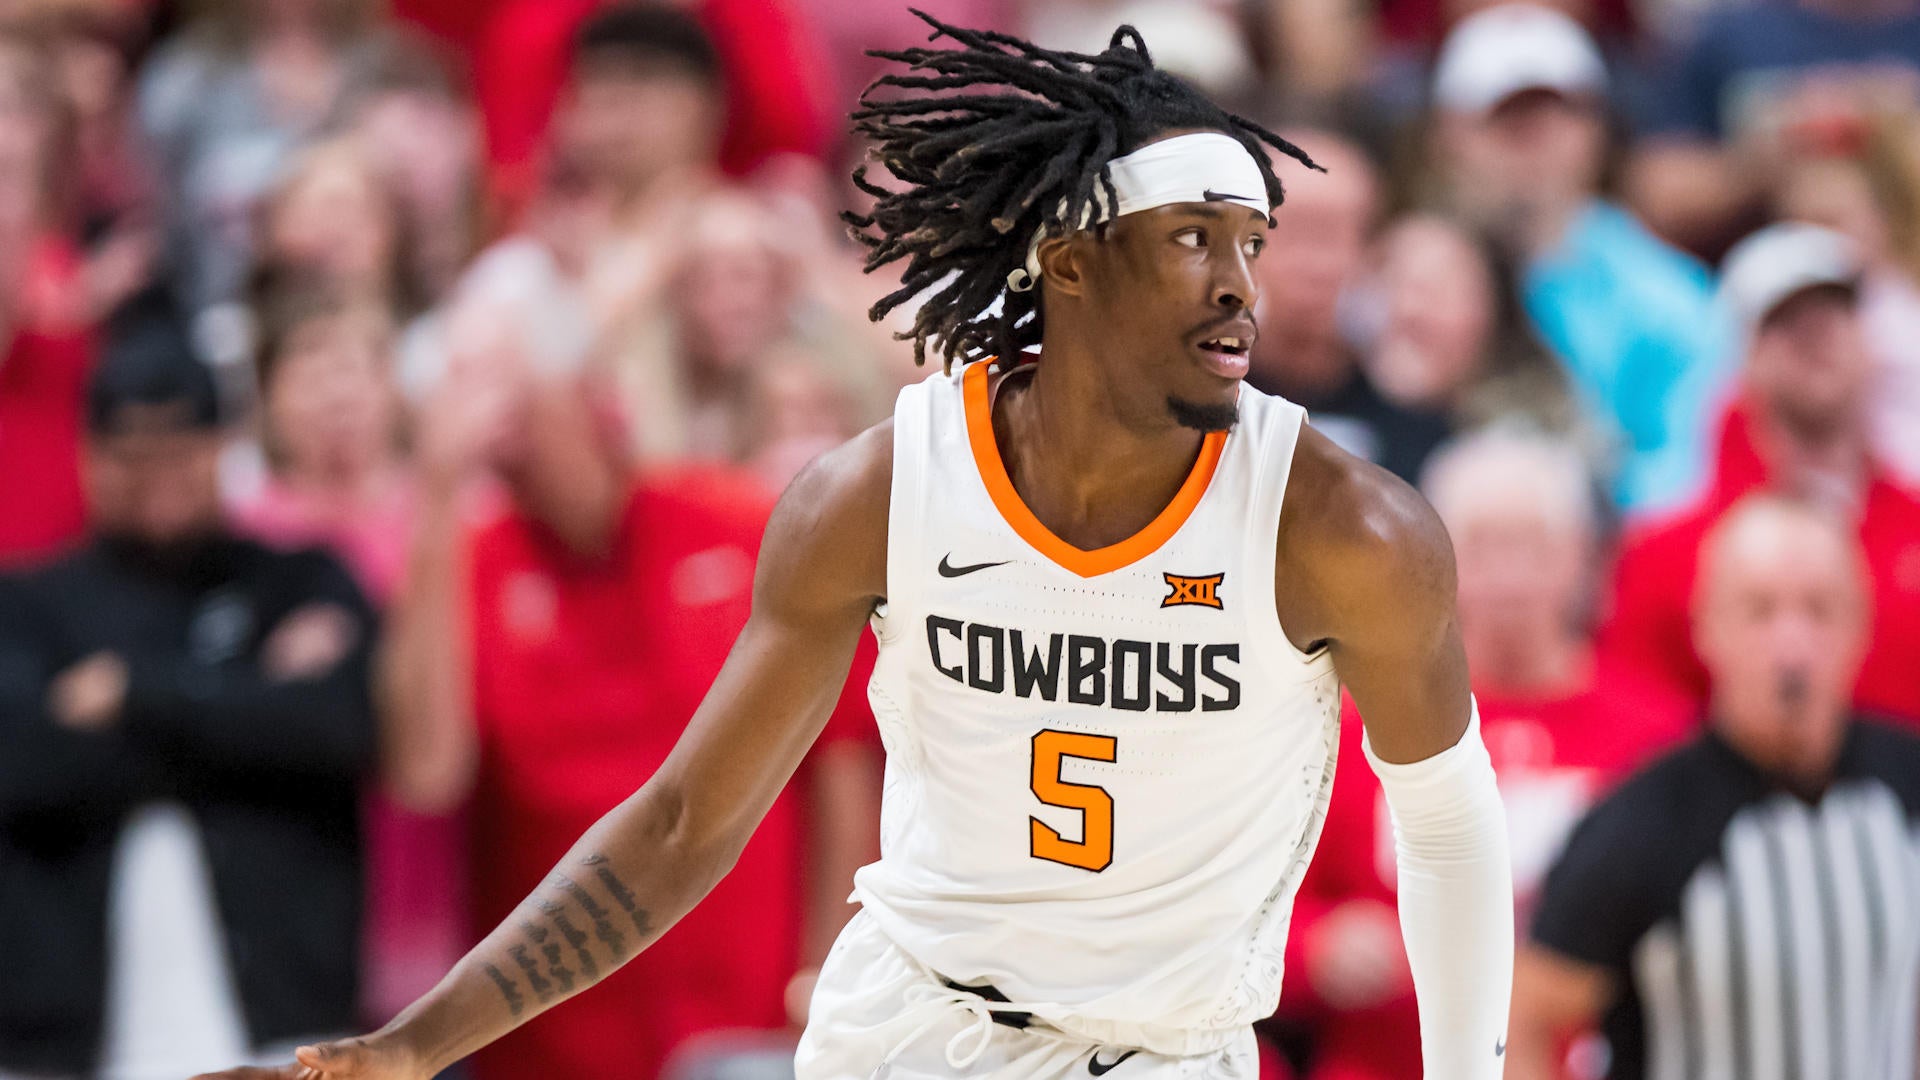 Jerry Palm Bracketology Top Team To Watch In Big 12 Tournament Live